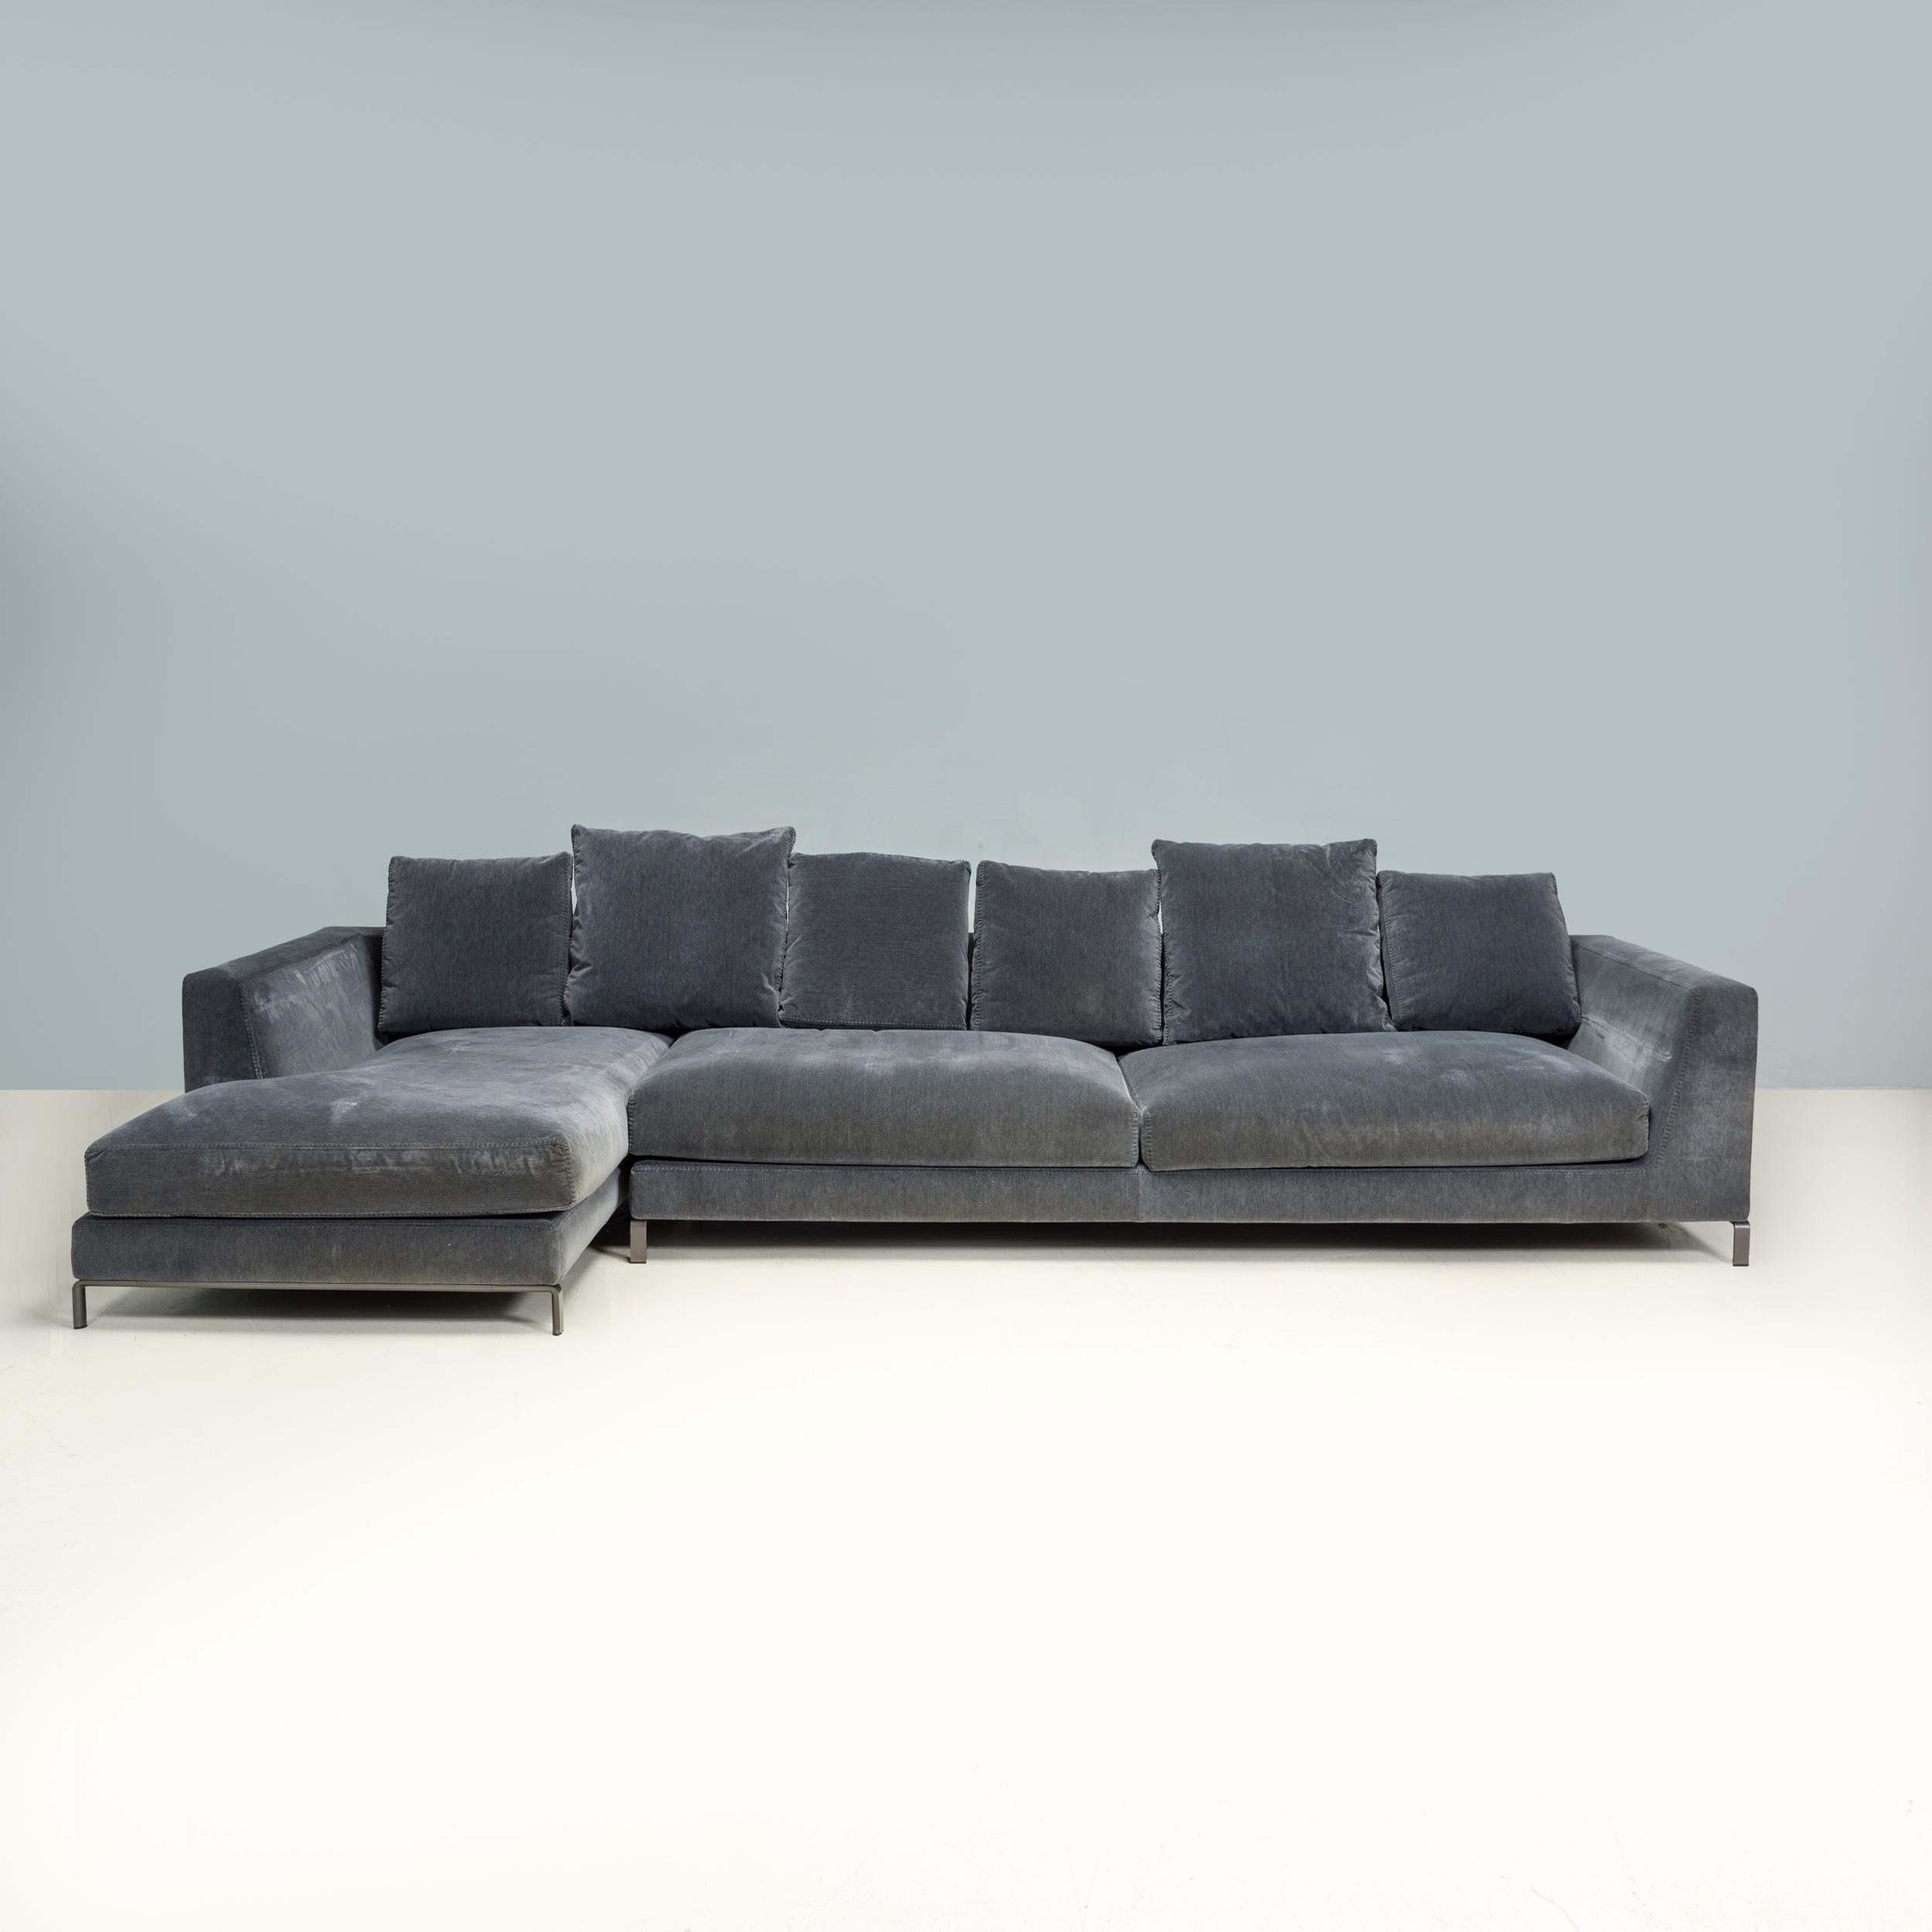 Originally designed by Antonio Citterio for B&B Italia in 2012, the Ray sofa is a fantastic example of contemporary Italian design.

Constructed from tubular steel, the modular sofa has two components, sitting on a slimline base in a bronze nickel